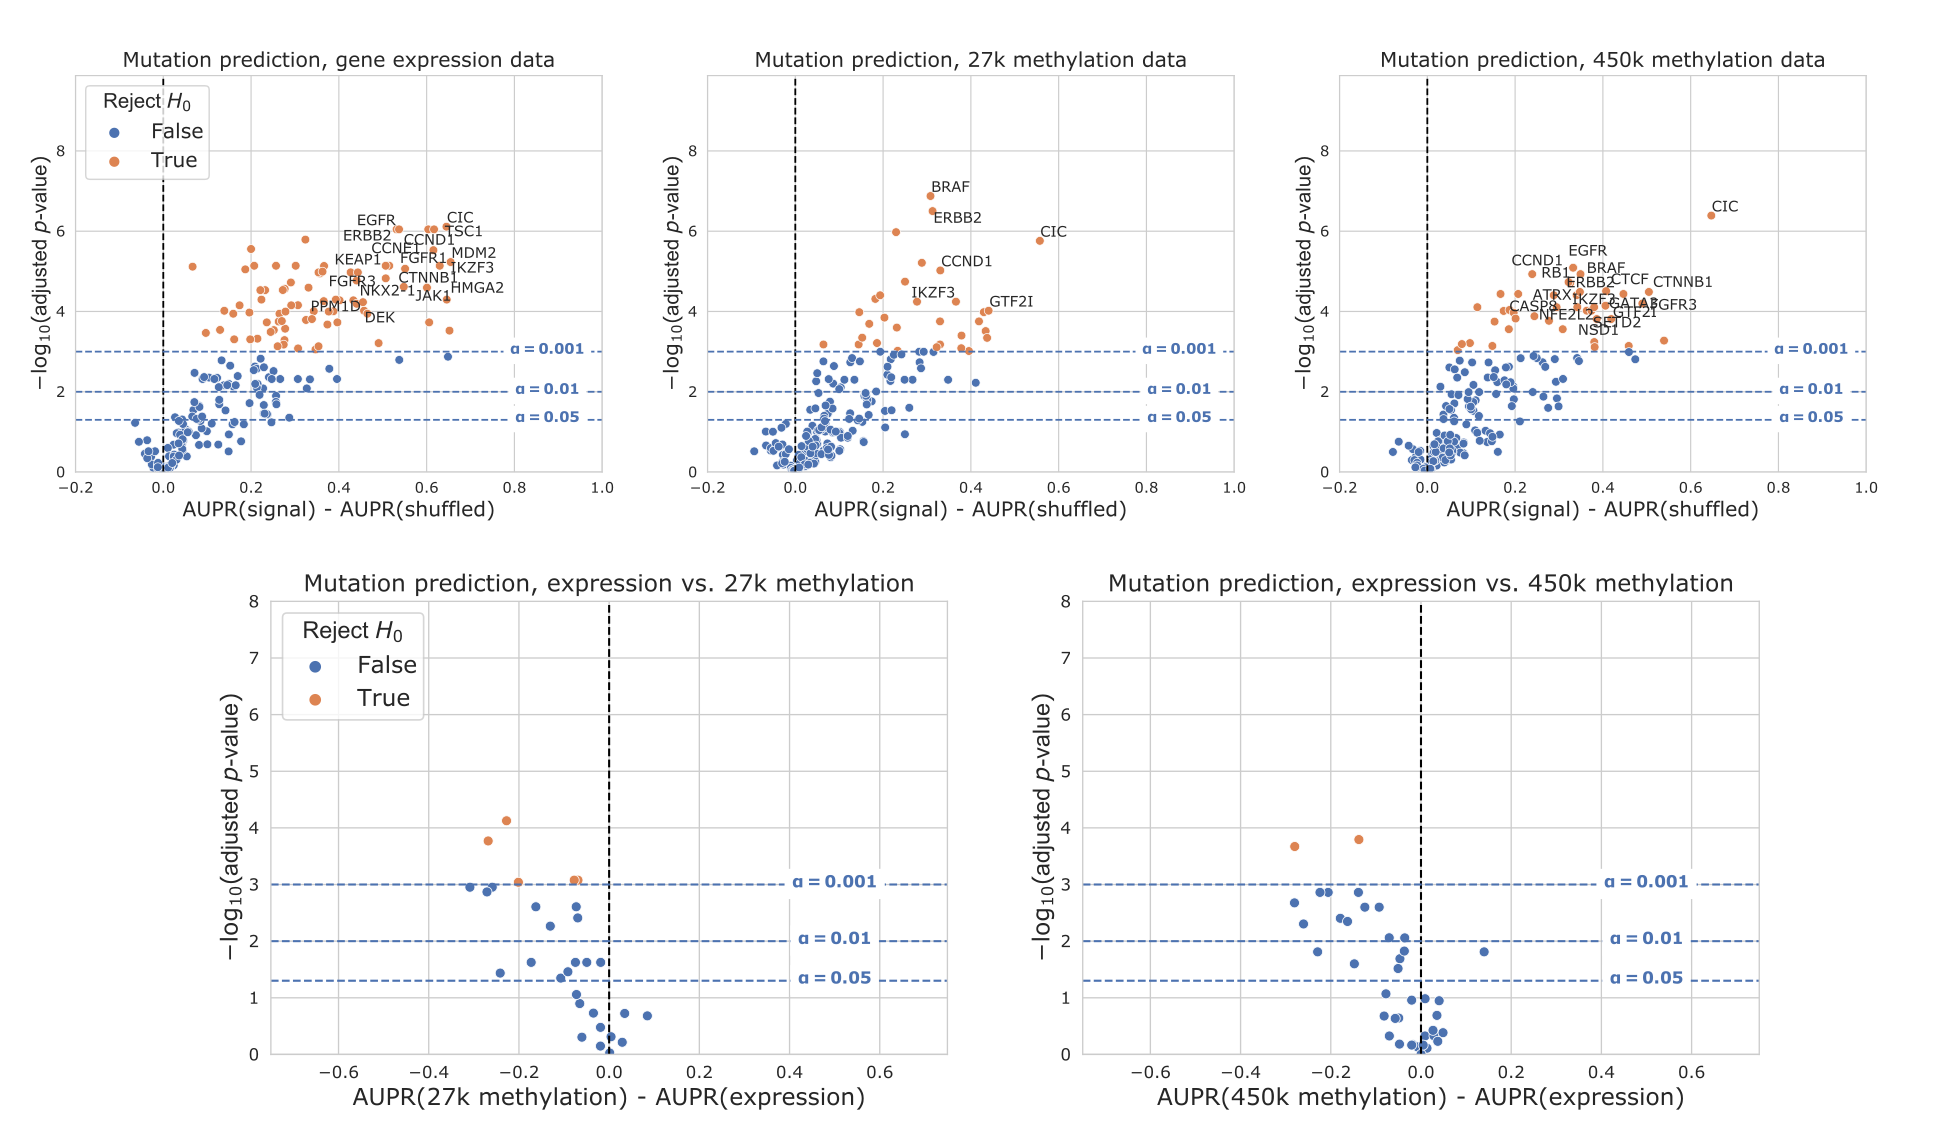 Figure S3: Volcano-like plots showing predictive performance for each gene in the cancer-related gene set for expression and DNA methylation, on the sample set used for the “all data types” experiments. The first row shows performance relative to the permuted baseline, and the second row shows direct comparisons between data types for genes that outperformed the permuted baseline only for both data types. The x-axis shows the difference in mean AUPR compared with a baseline model trained on permuted labels, and the y-axis shows p-values for a paired t-test comparing cross-validated AUPR values within folds.